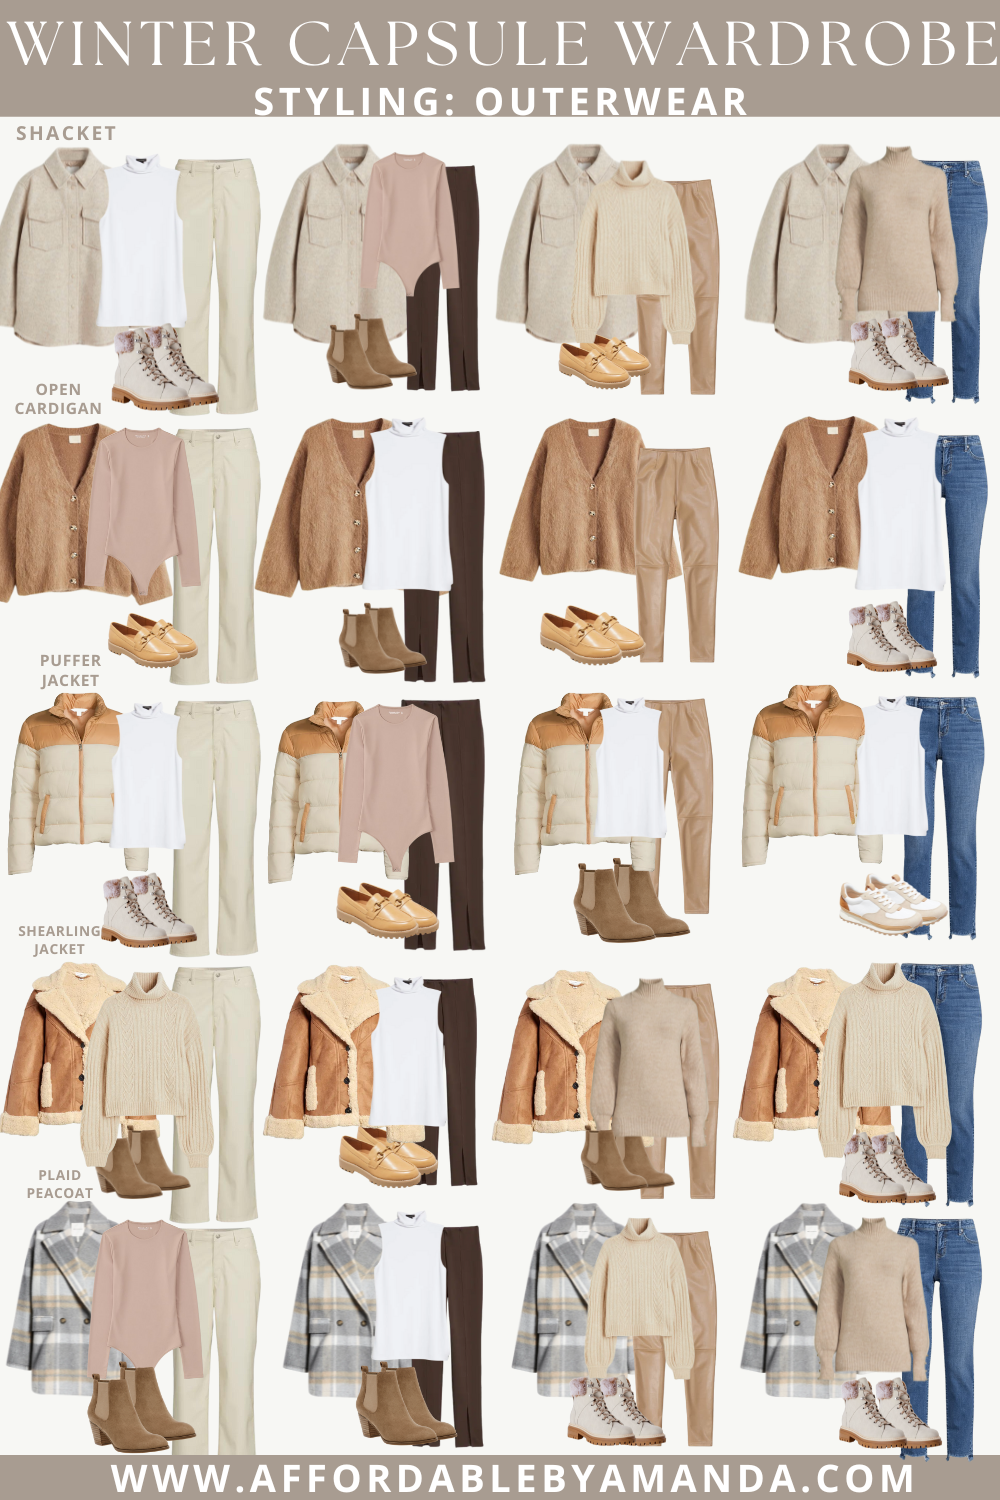 Winter Capsule Wardrobe 2022 - What To Wear in Winter 2022 - Capsule Wardrobe - Everything You Need in 2022 Fall Winter Capsule Wardrobe